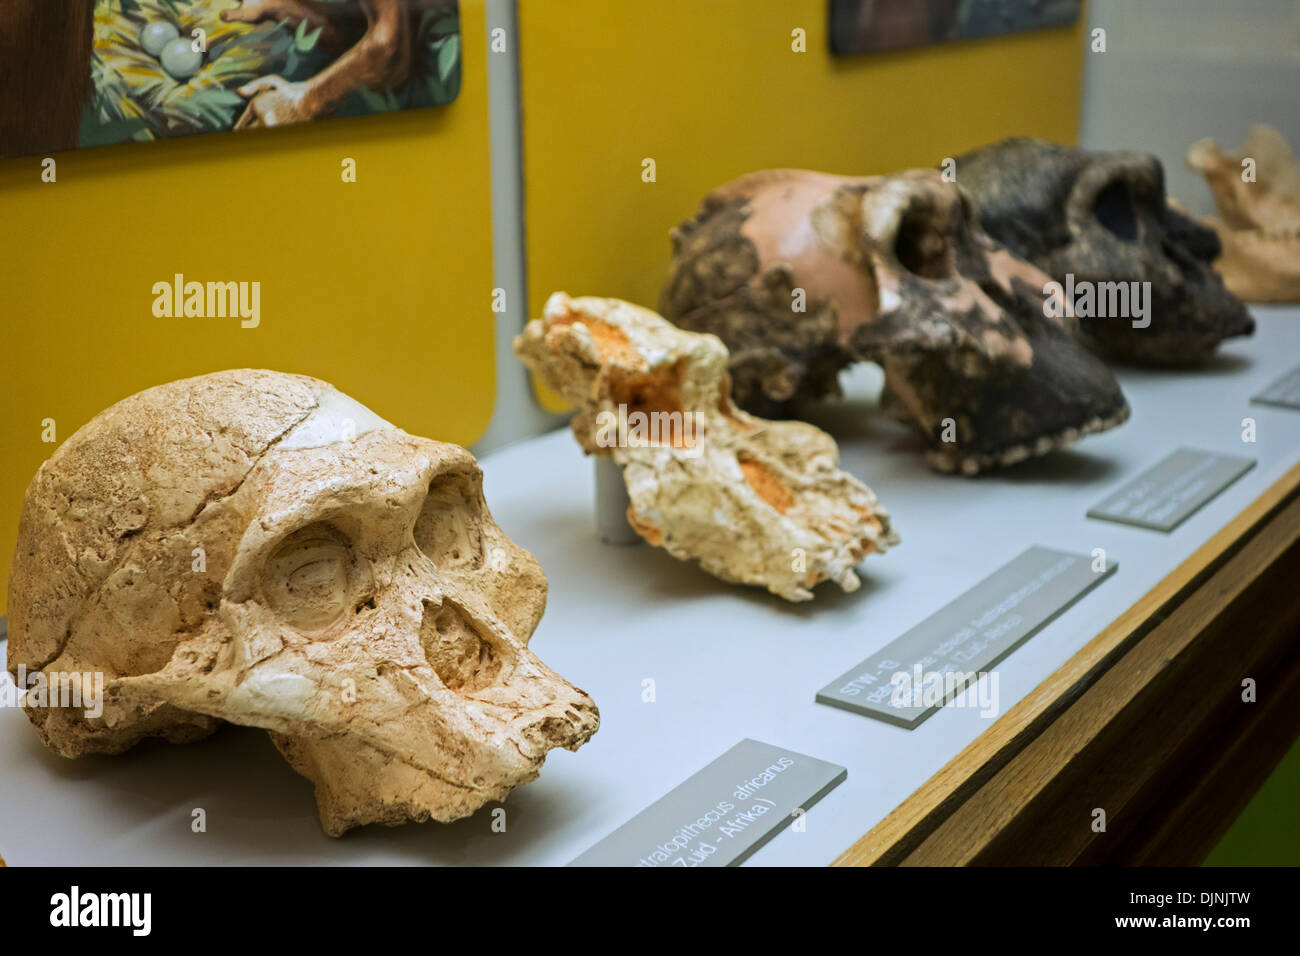 Skull of Australopithecus africanus and hominin fossils relating to human evolution, natural history museum Kina, Ghent, Belgium Stock Photo